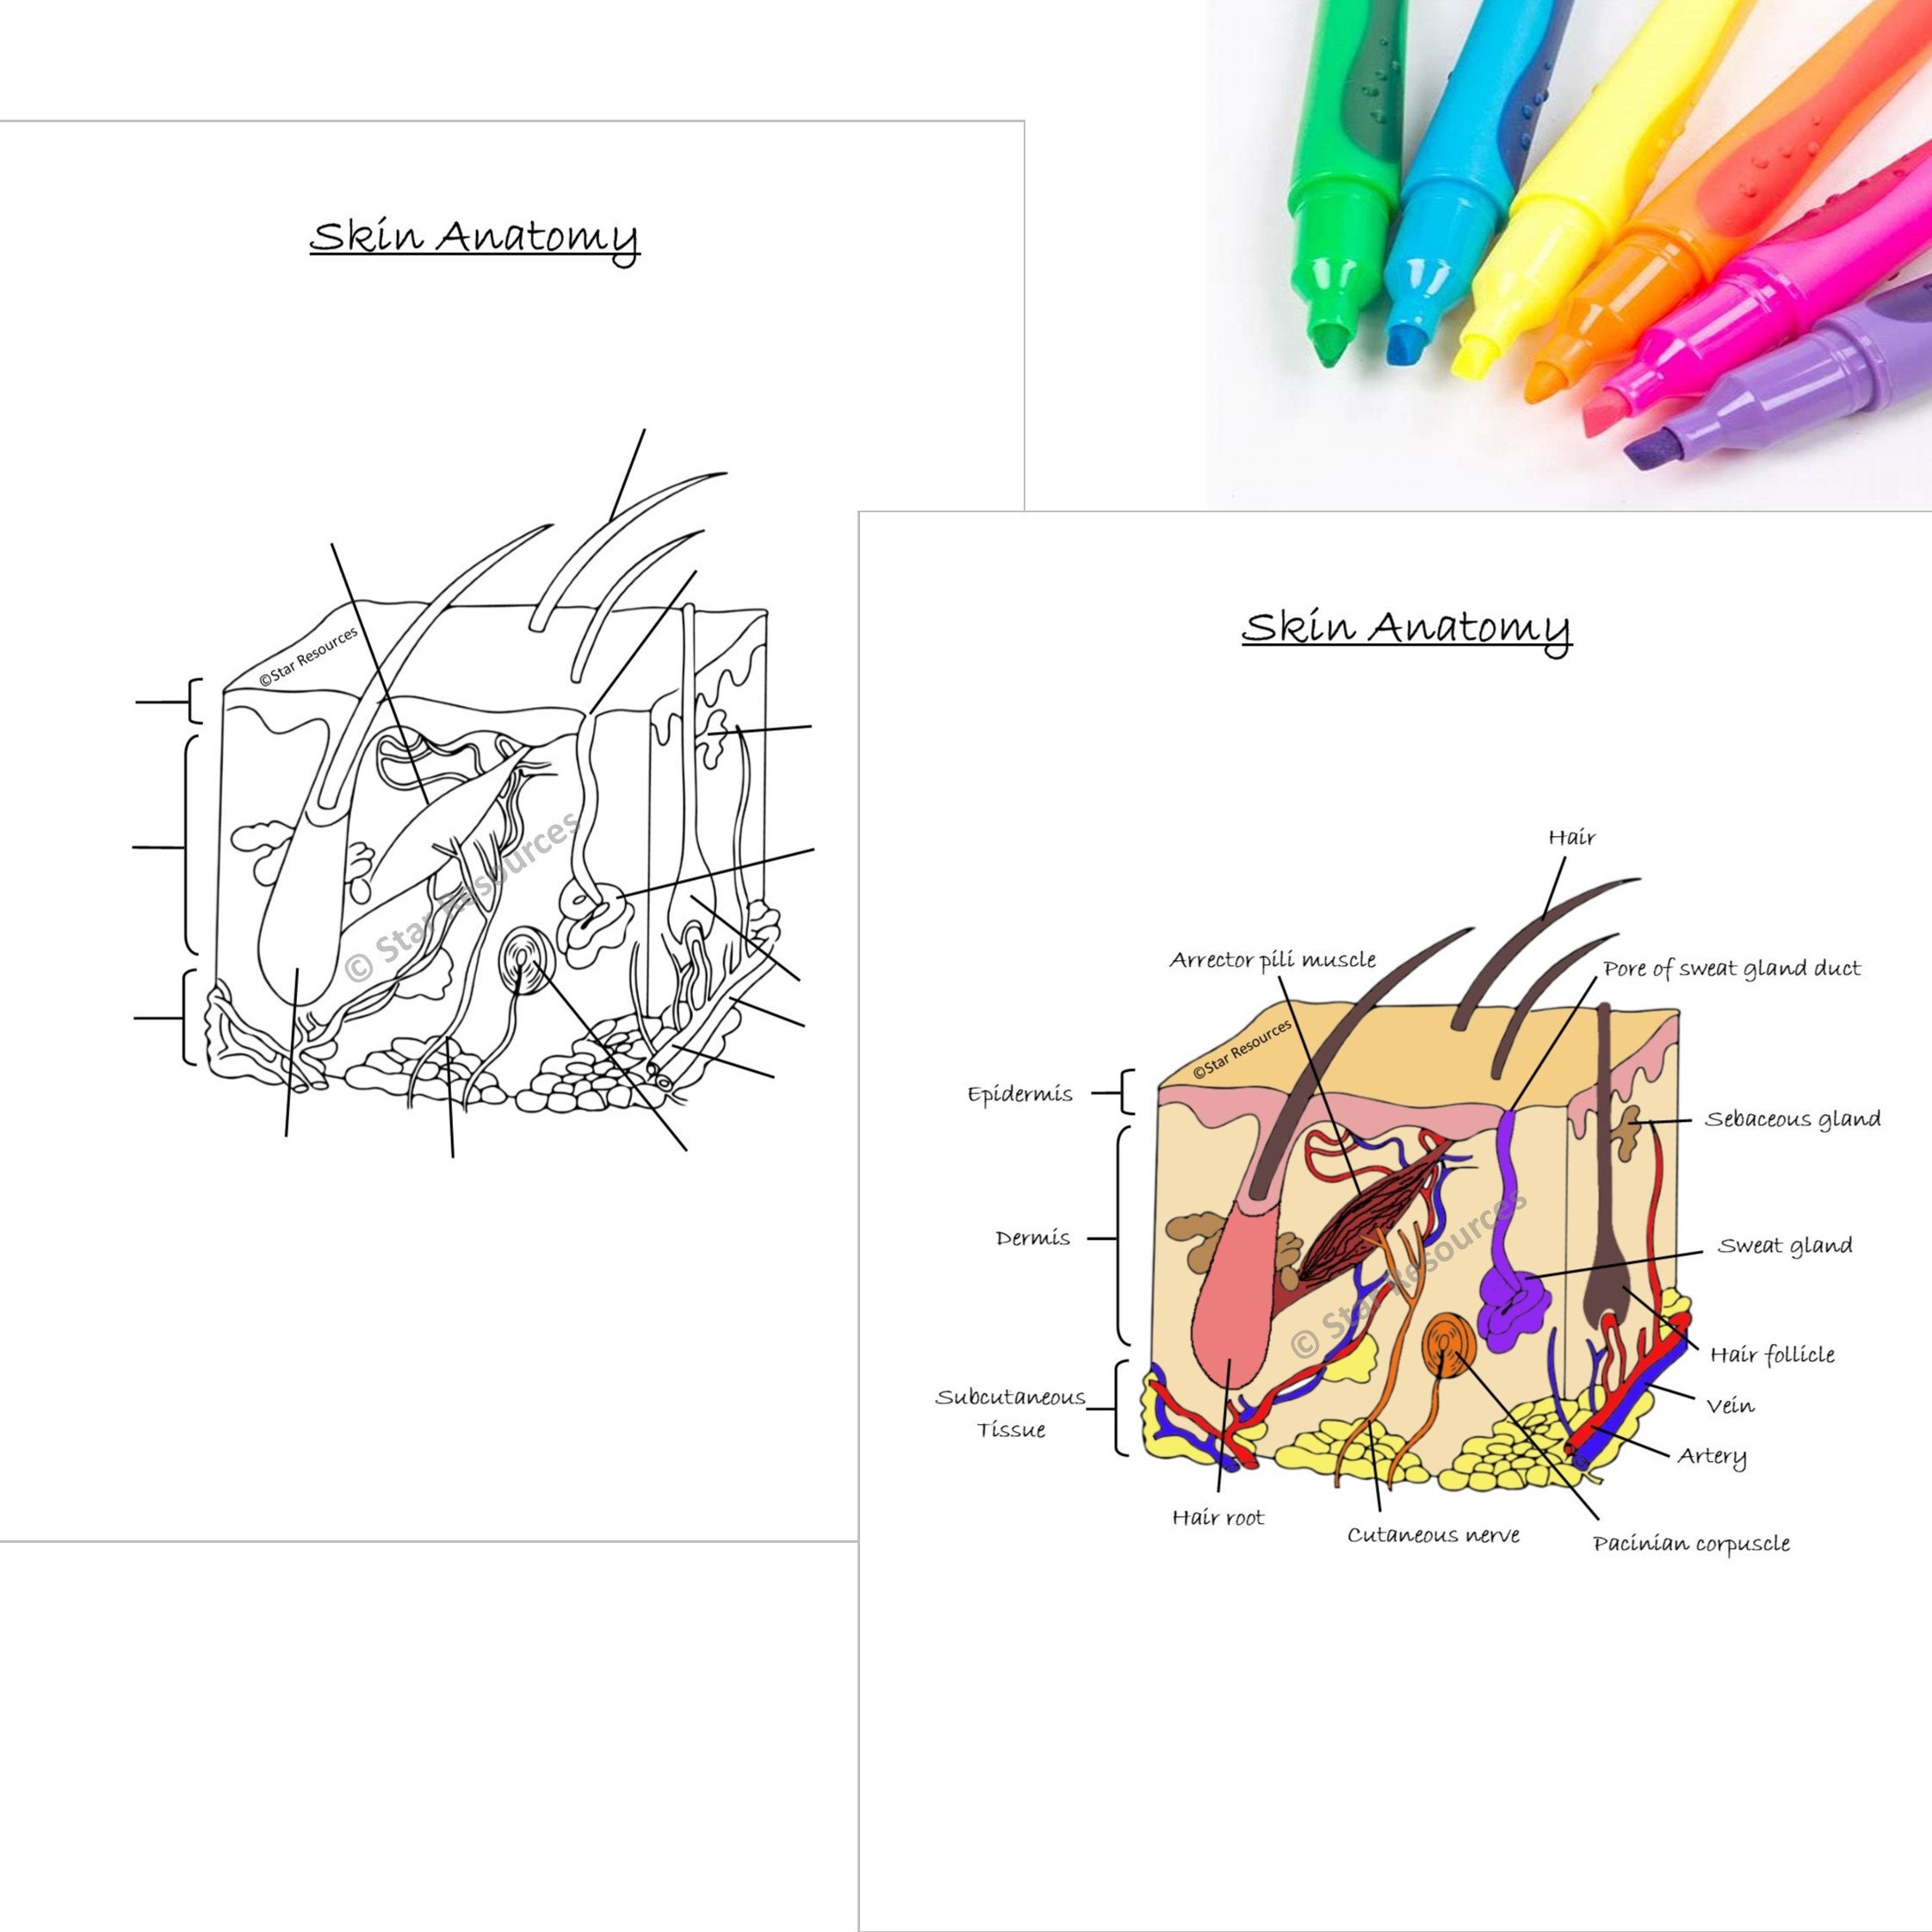 Human anatomy colouring page anatomy of human skin pdf instant download